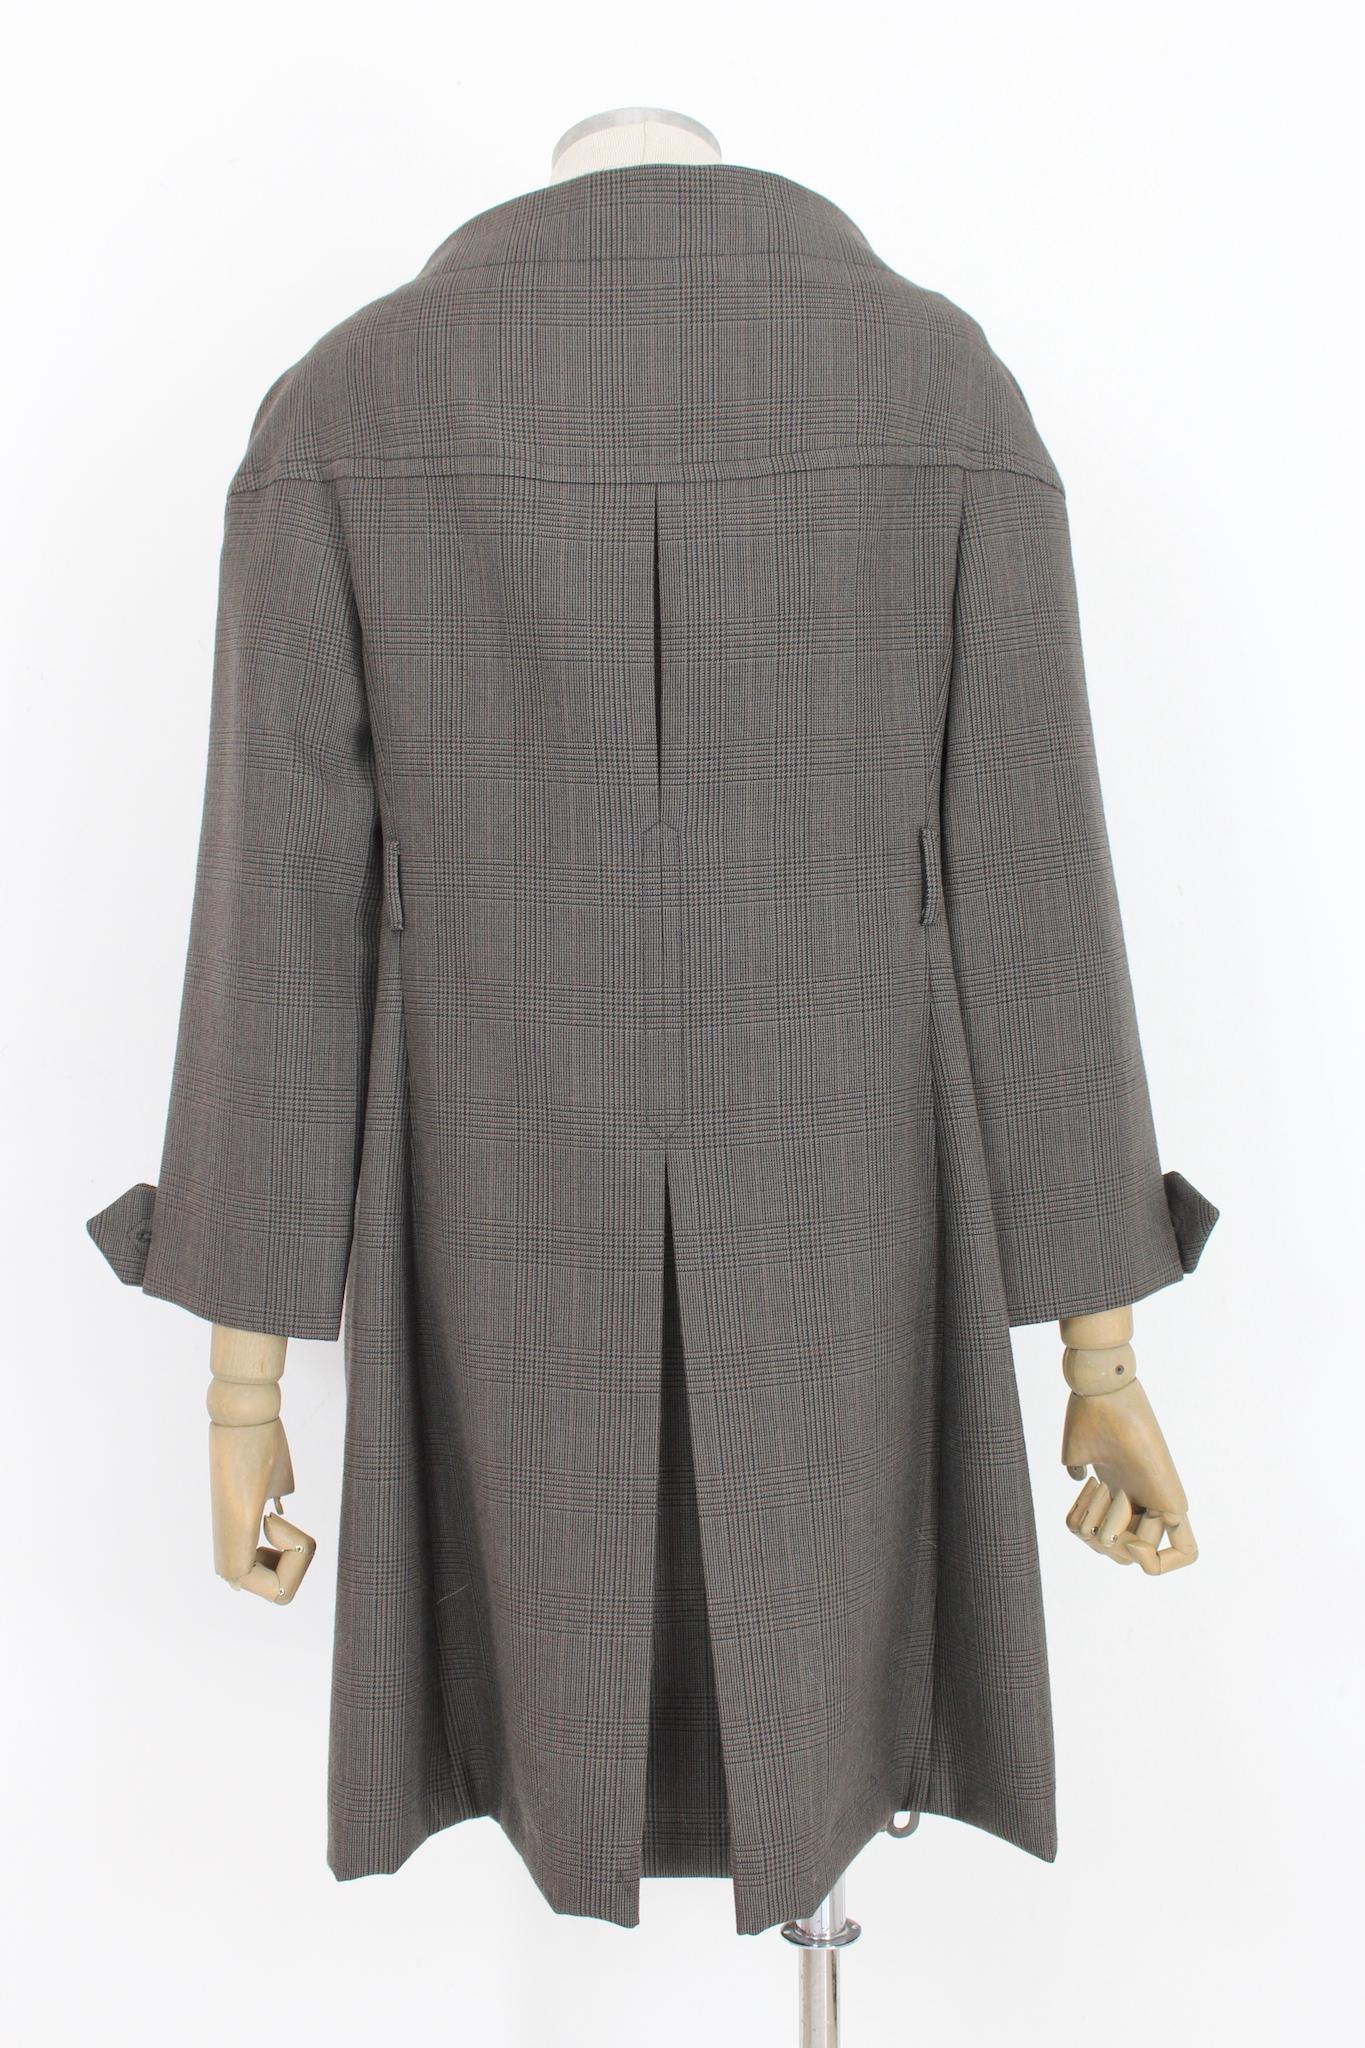 Prada 2000s vintage coat. Double-breasted with brown and blue checked pattern. Round collar, clip button closure, 3/4 sleeve. 100% virgin wool fabric, internally unlined. Made in Italy.

Size: 46 It 12 Us 14 Uk

Shoulder: 46 cm
Bust / Chest: 49